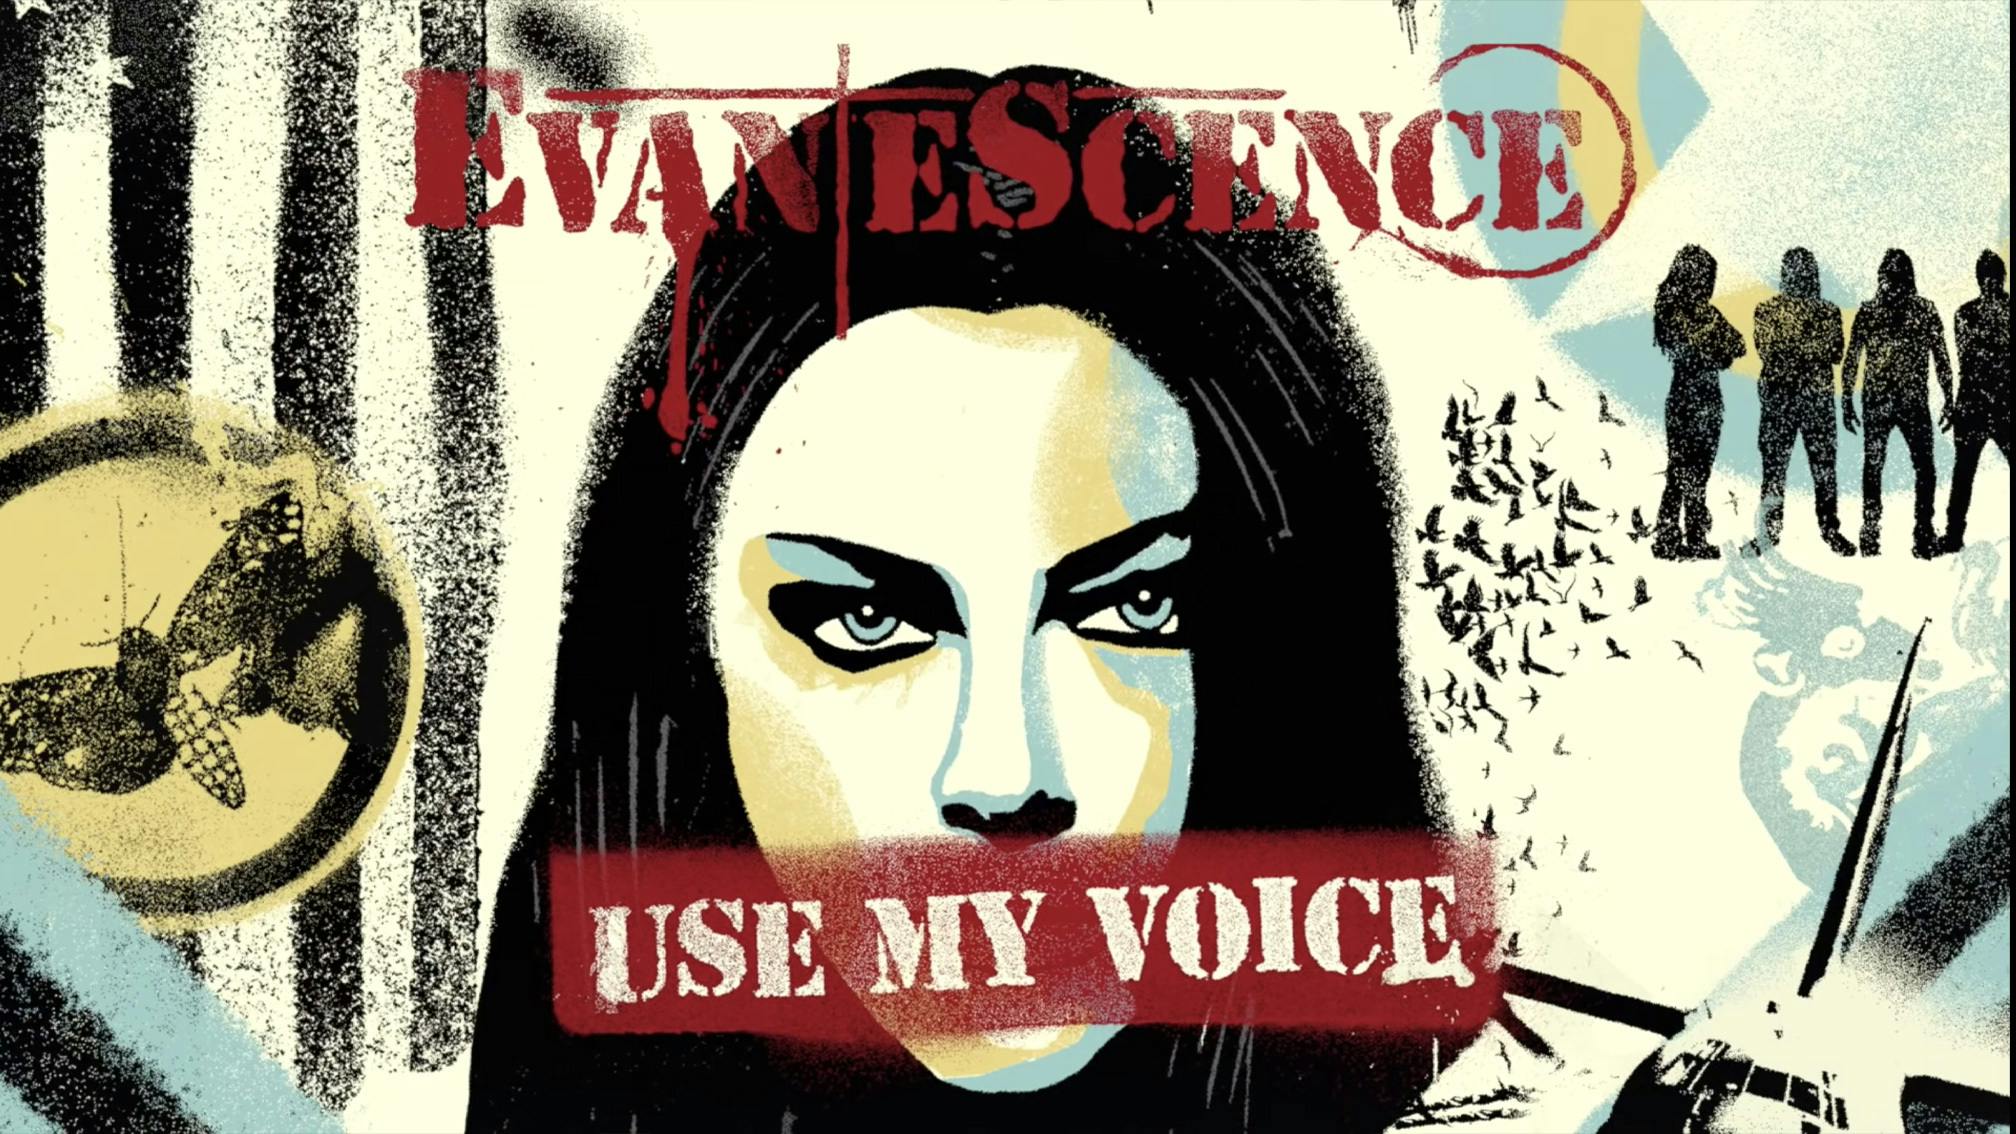 Evanescence Release New Single, Use My Voice, Featuring Lzzy Hale, Taylor Momsen And More